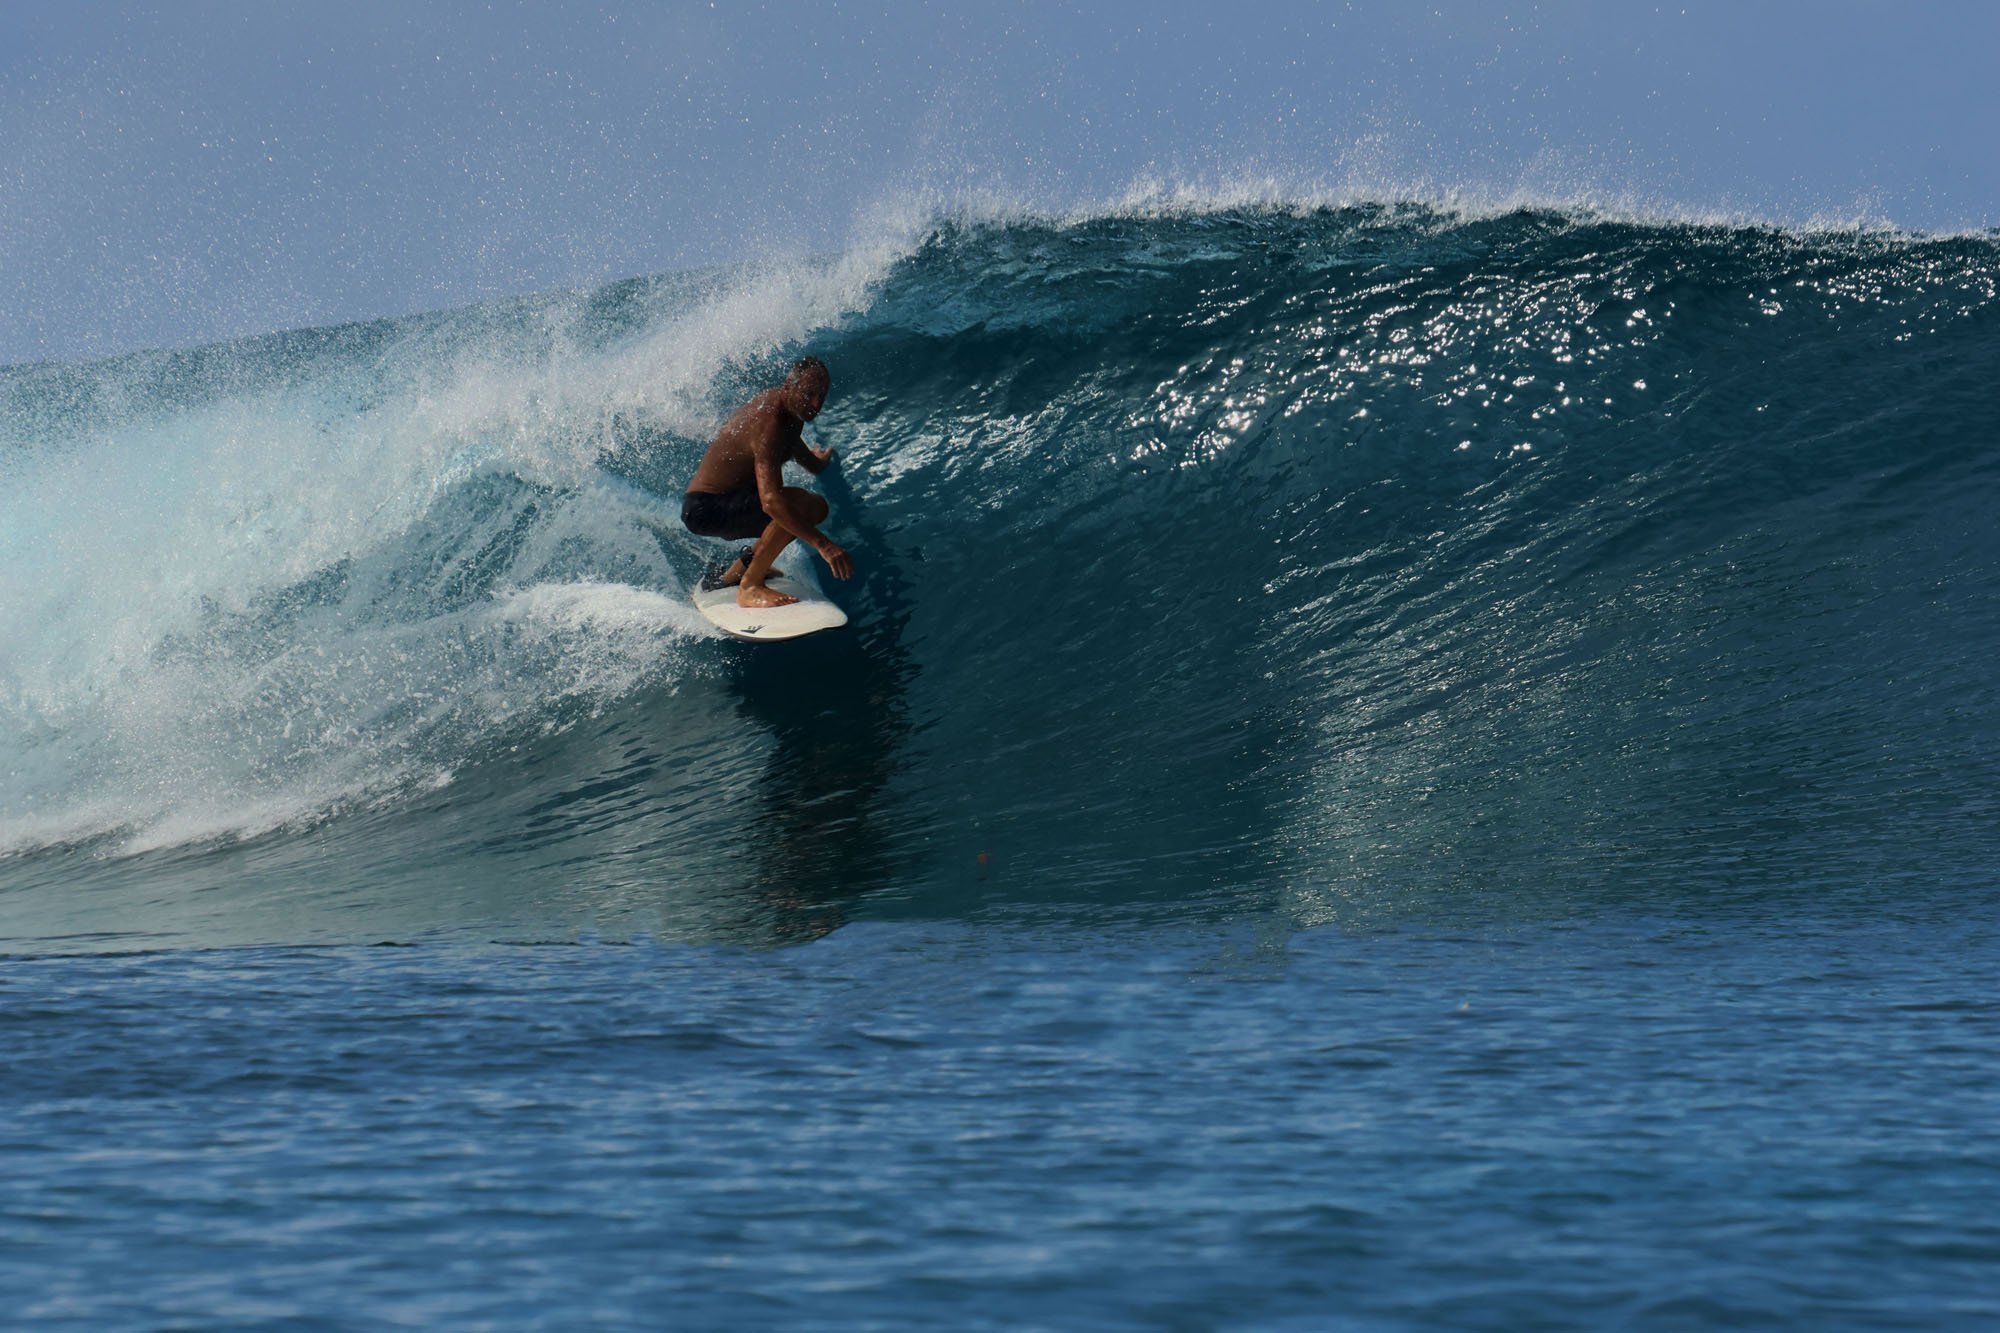 Swain Man on barrel 5 for the session